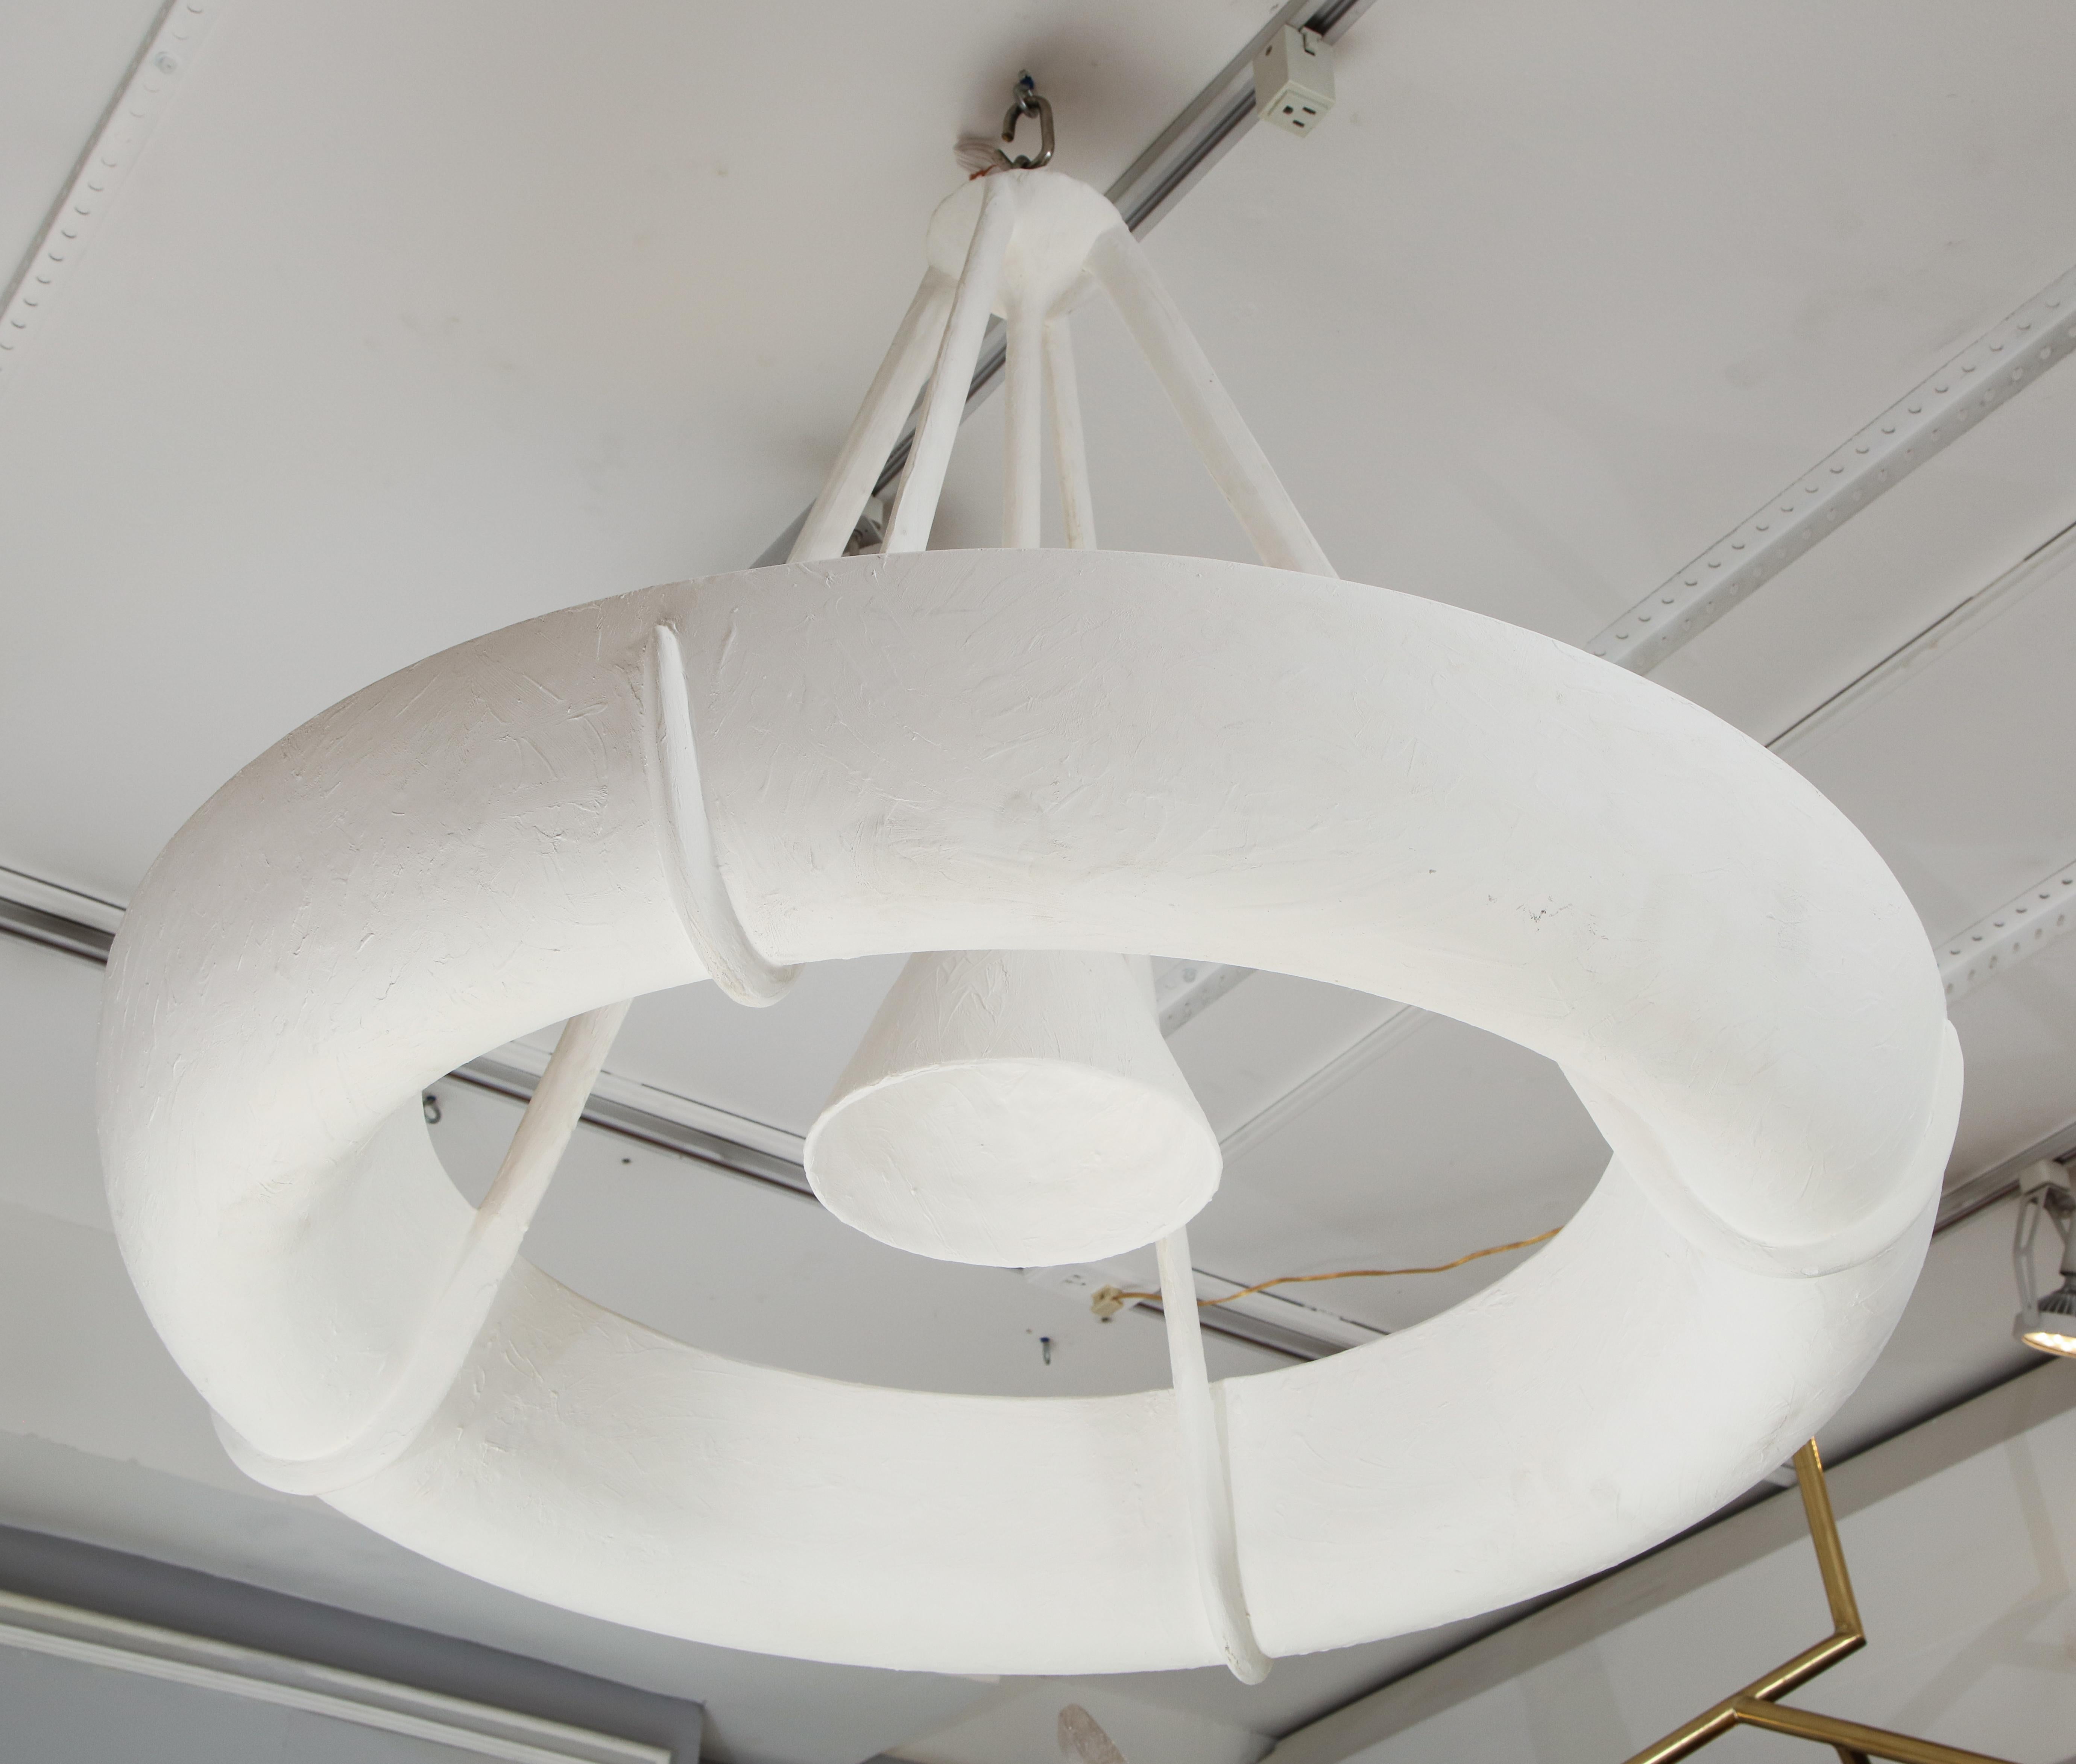 Sculptural Bespoke Plaster Fixture in the Jean Michel Frank manner.
Please note that this fixture takes (1) Edison bulb at 40 or 60 watts in the center and (8) e-12 candelabra bulbs at 40 watts each in the interior (8) sockets = 320 watts inside the